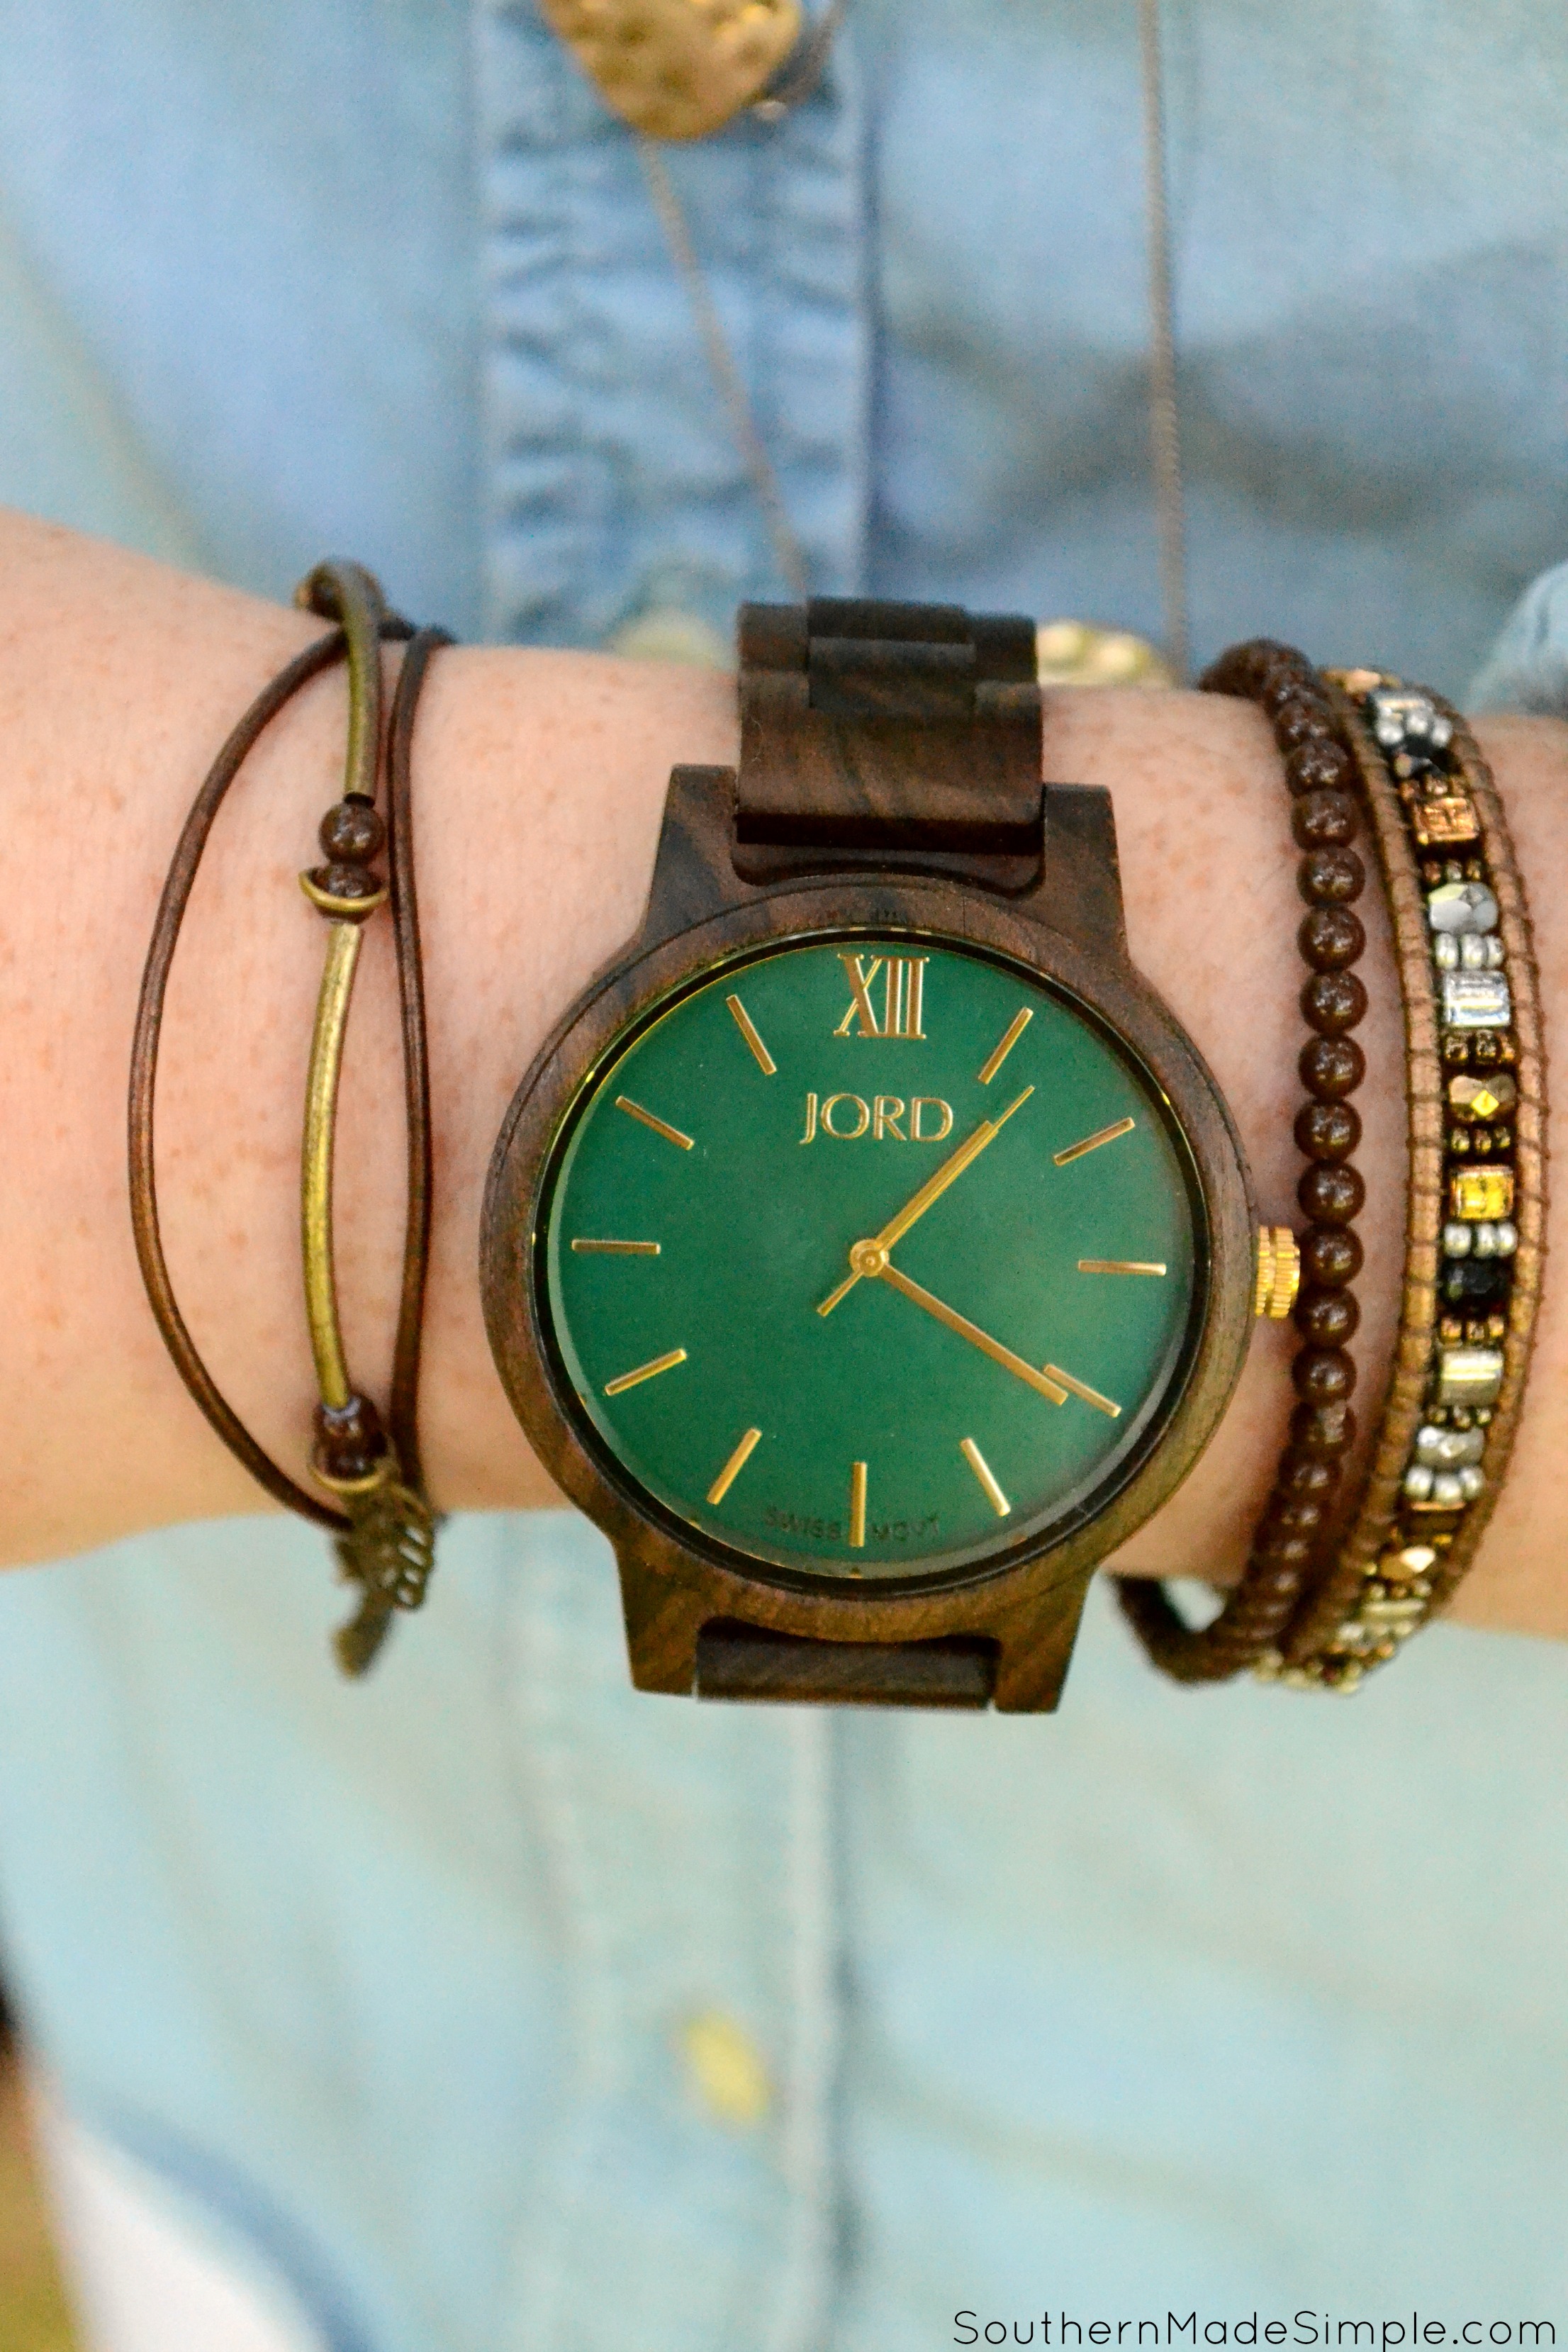 Celebrating every moment with JORD #jordwatch #woodwatch #gradgift #mothersday 